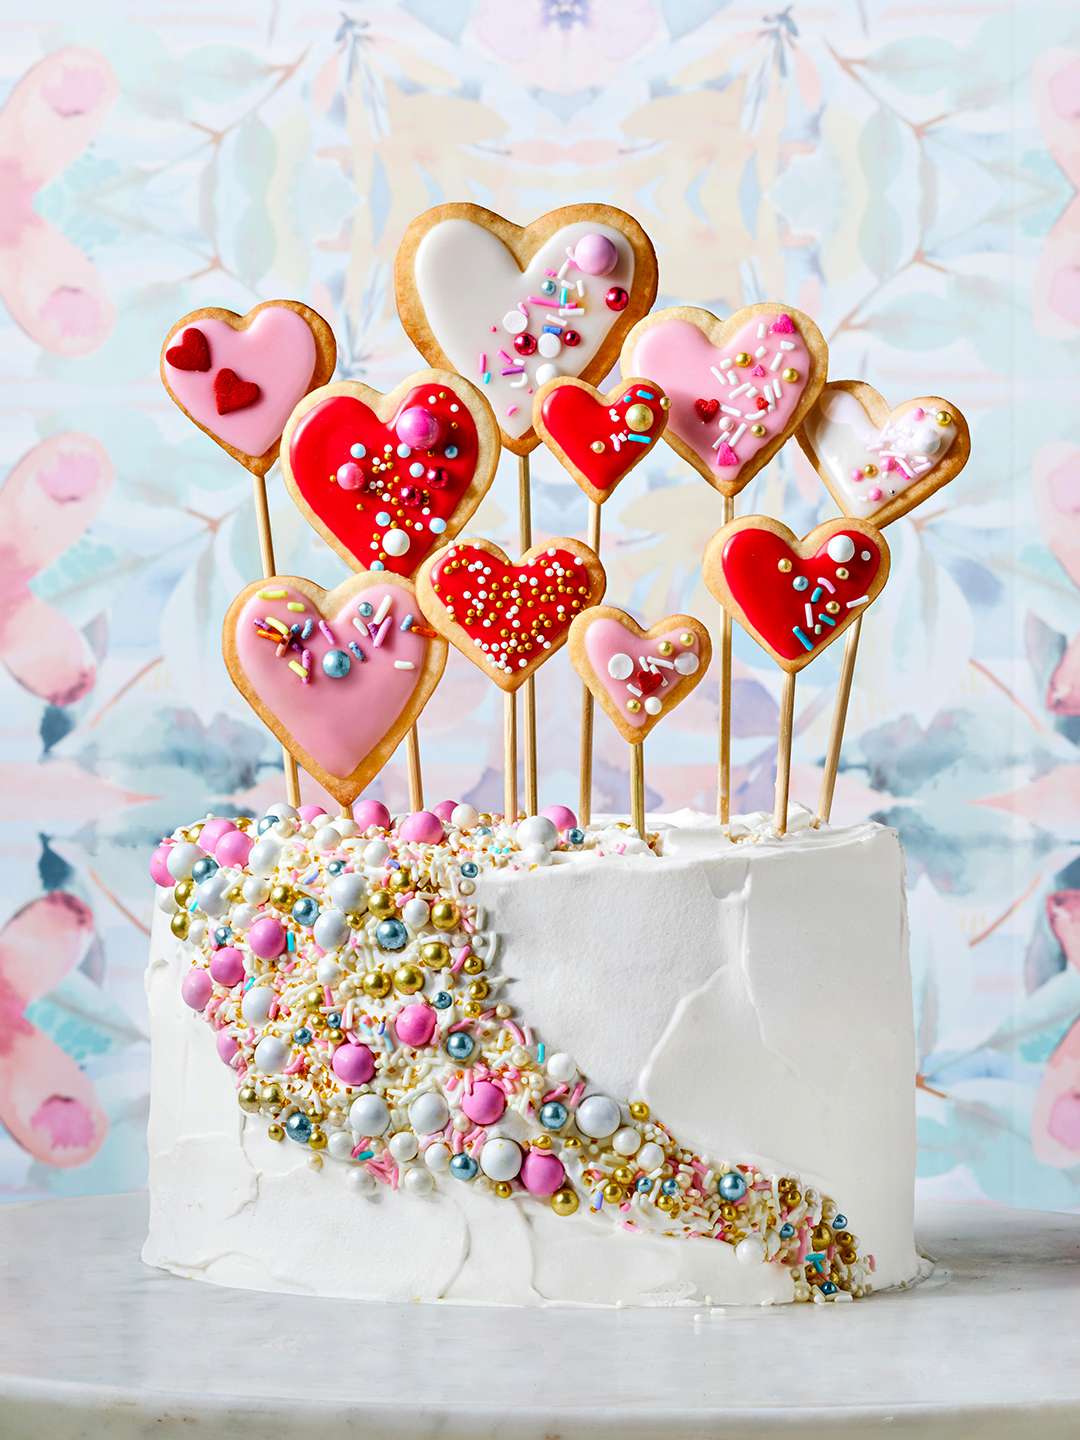 Valentine’s Cake topped with decorated heart-shaped cookies on a stick and a pattern of sprinkles